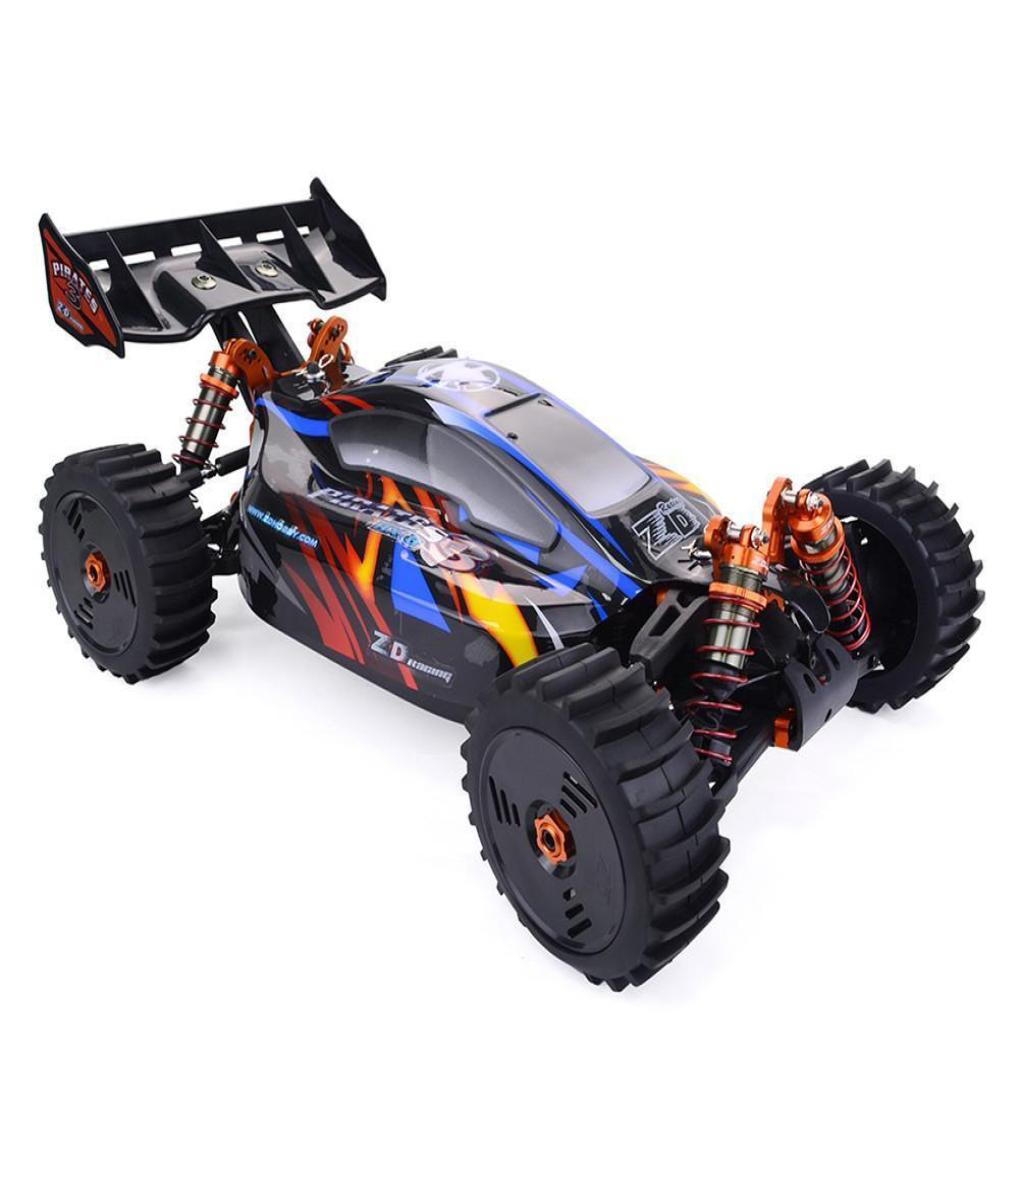 

RCtown ZD Racing Pirates3 BX8E 18 Scale 4WD Brushless electric Buggy Remote Control Car RC Racing Car Toys High Quality9155078